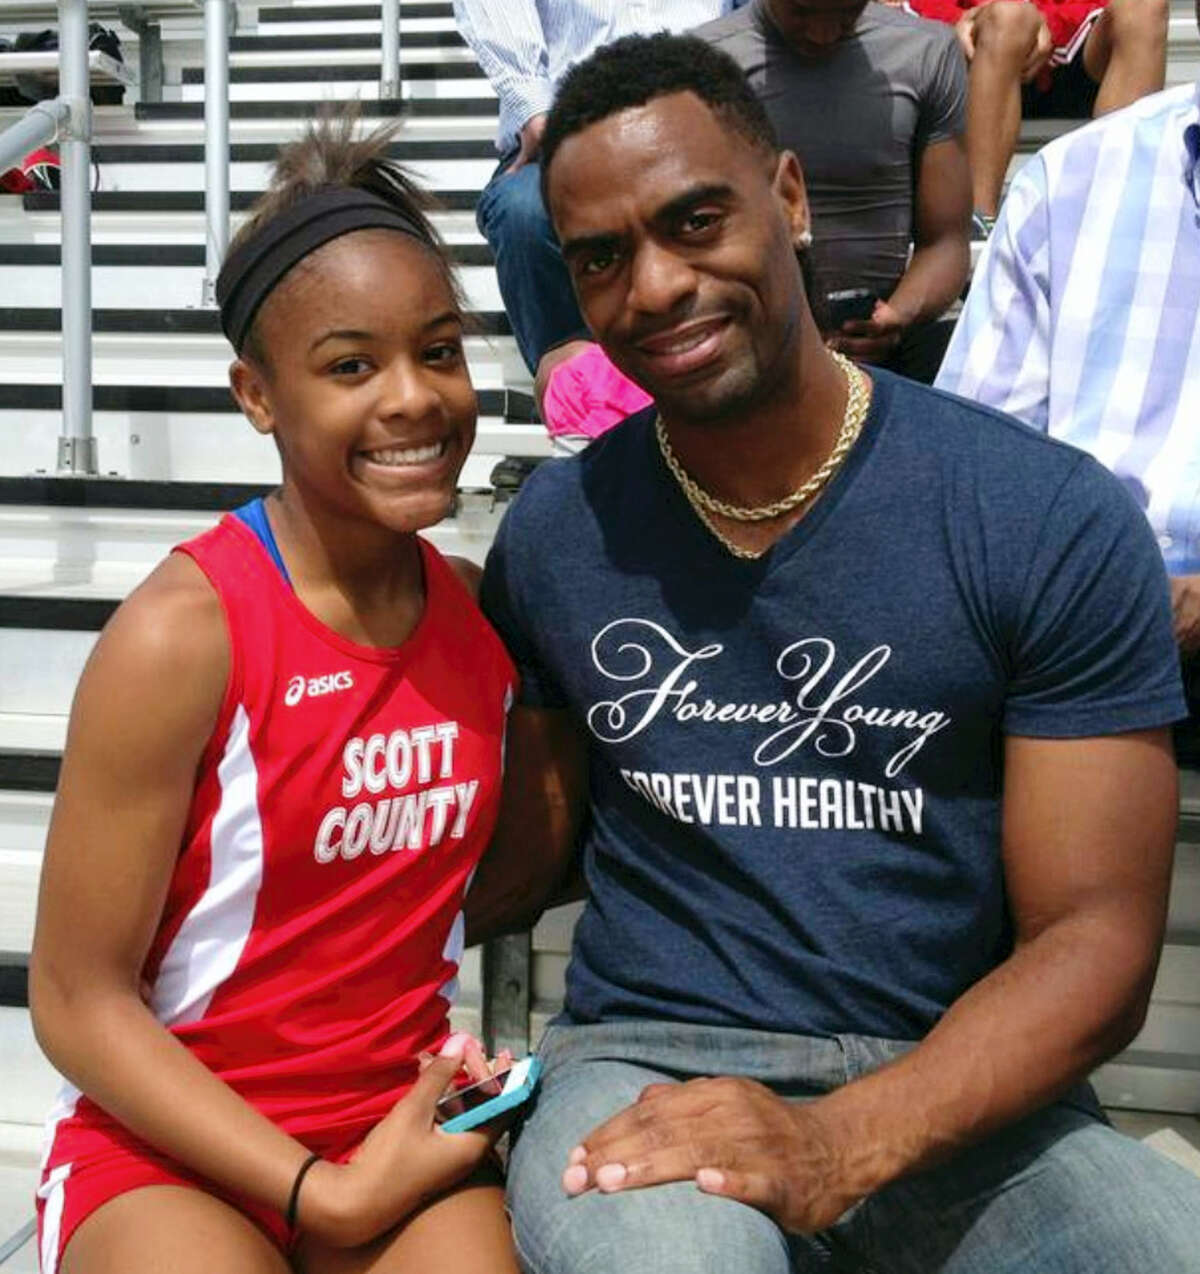 In this photo, Trinity Gay, a seventh-grader racing for her Scott County High School team, poses for a photo with her father Tyson Gay.